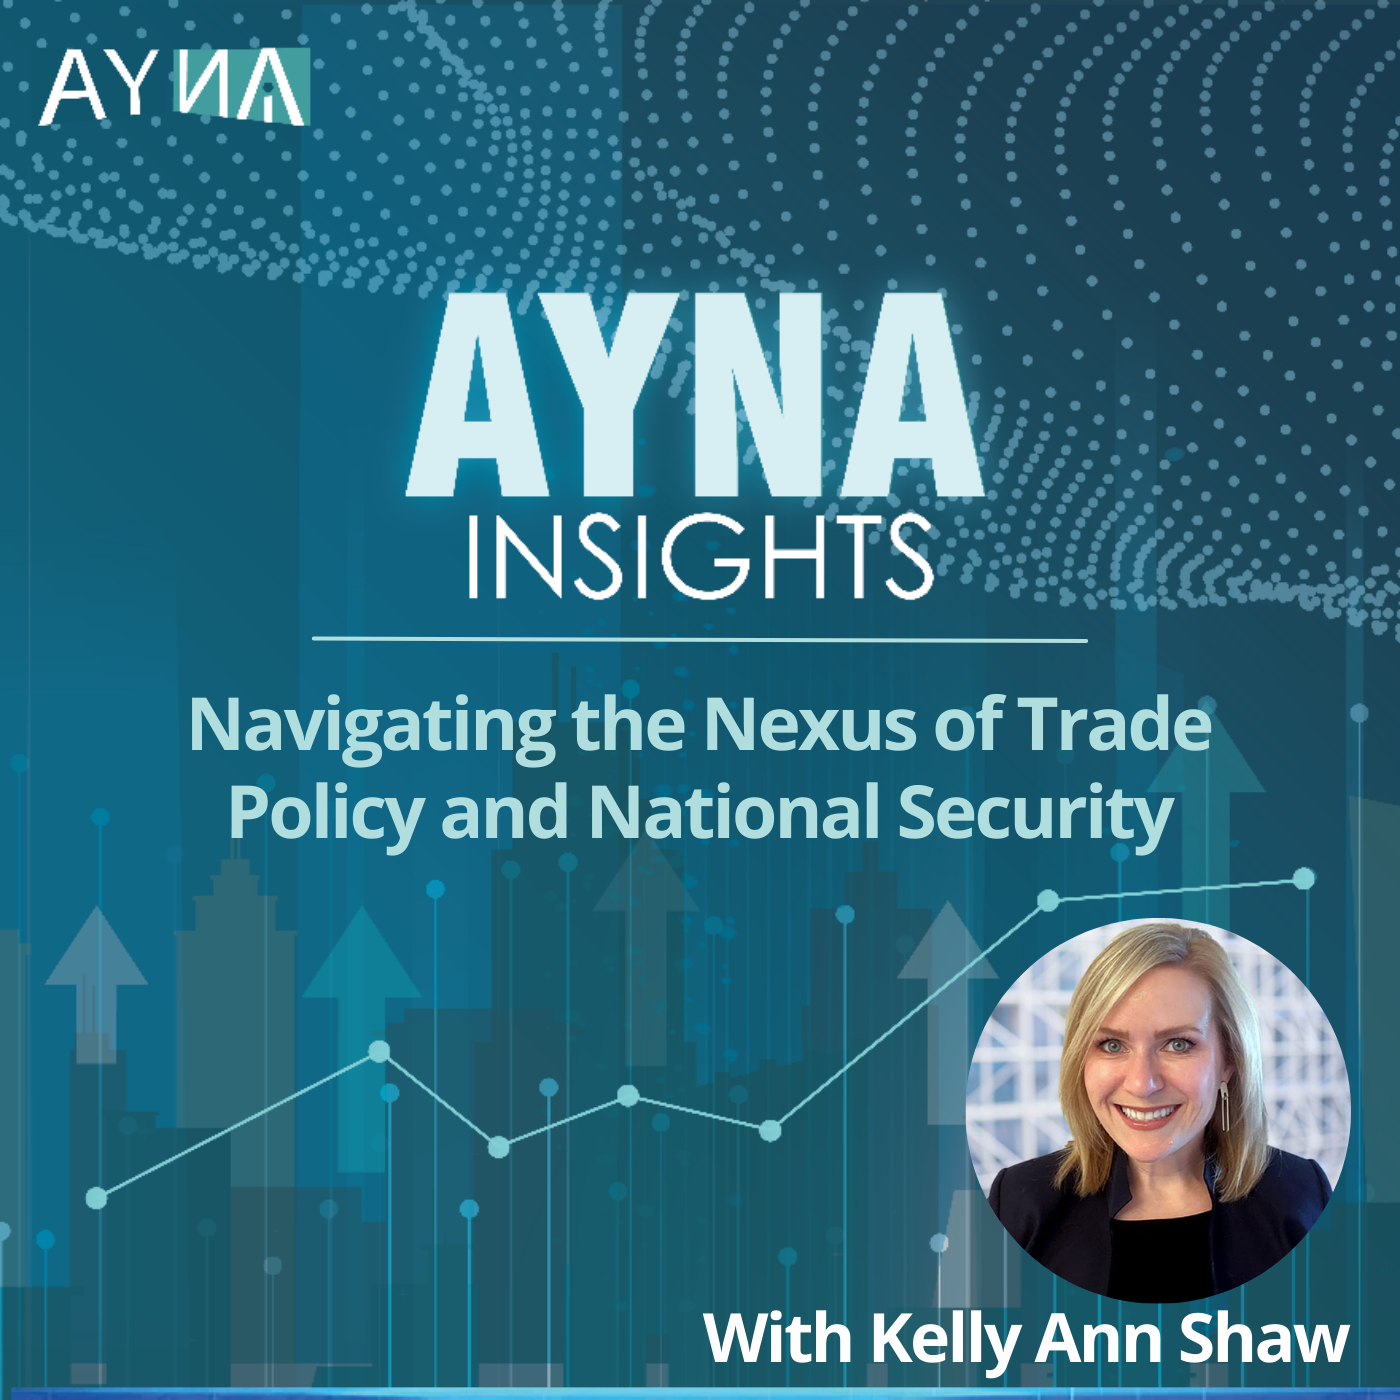 Kelly Ann Shaw: Navigating the Nexus of Trade Policy and National Security